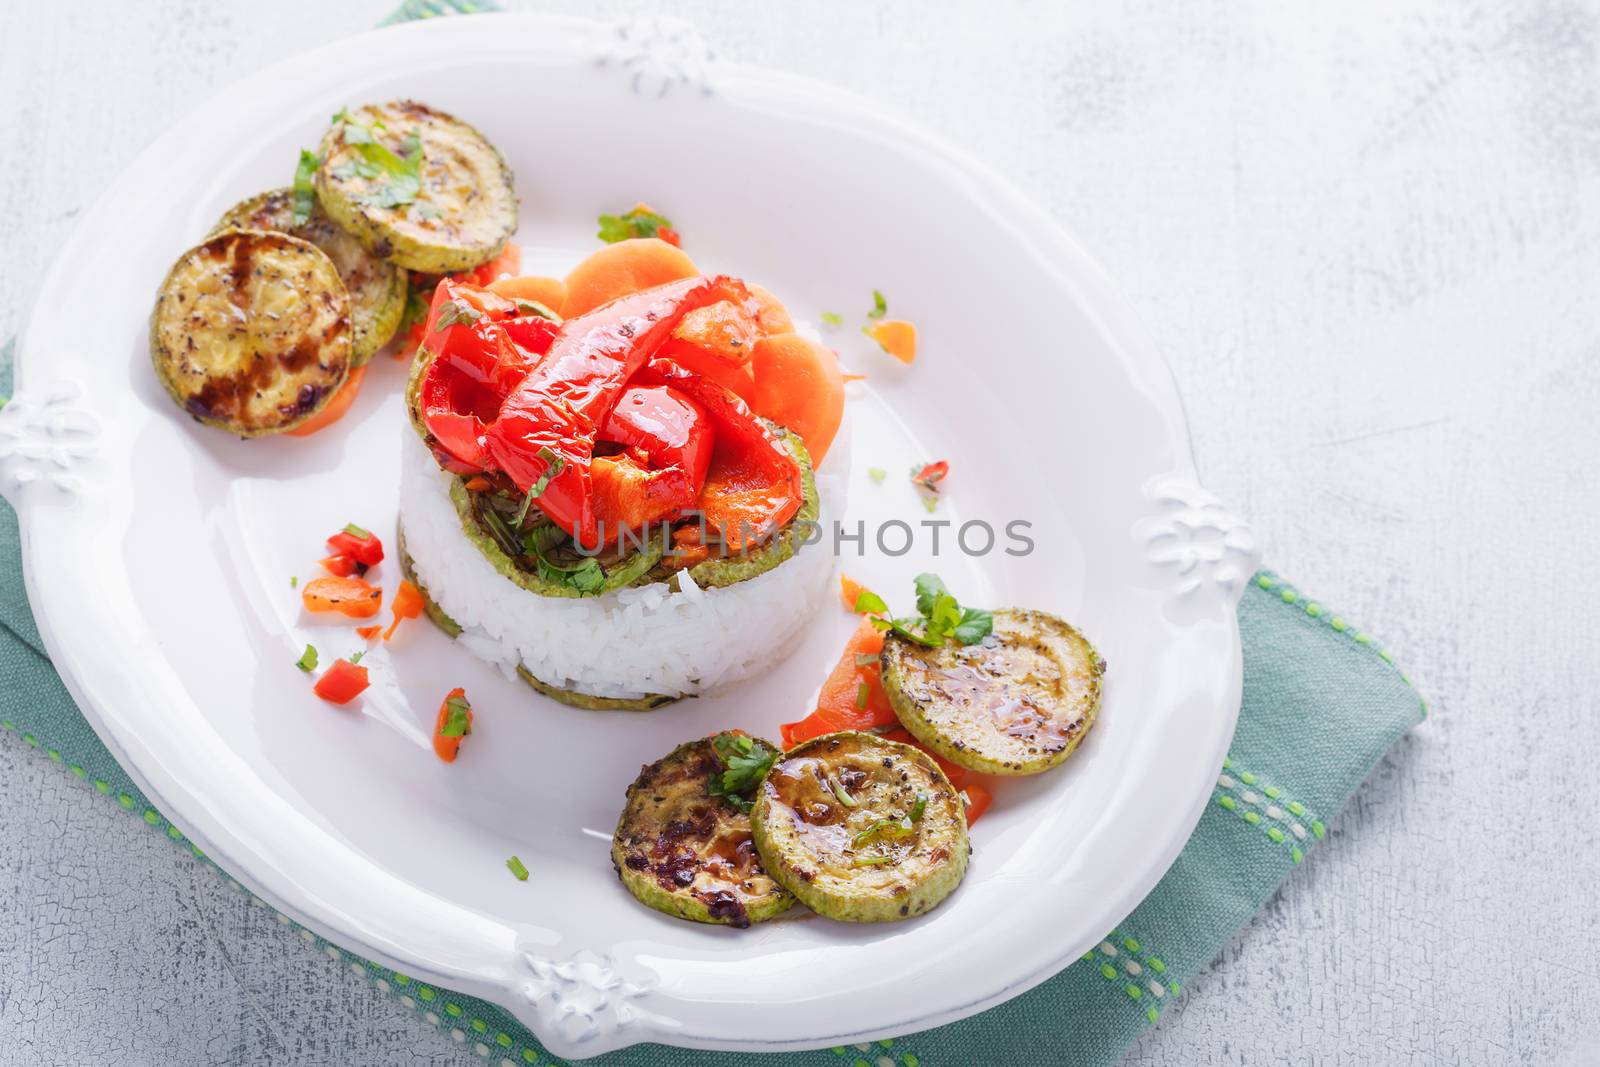 Rice timbale with fried zucchini, peppers, carrots